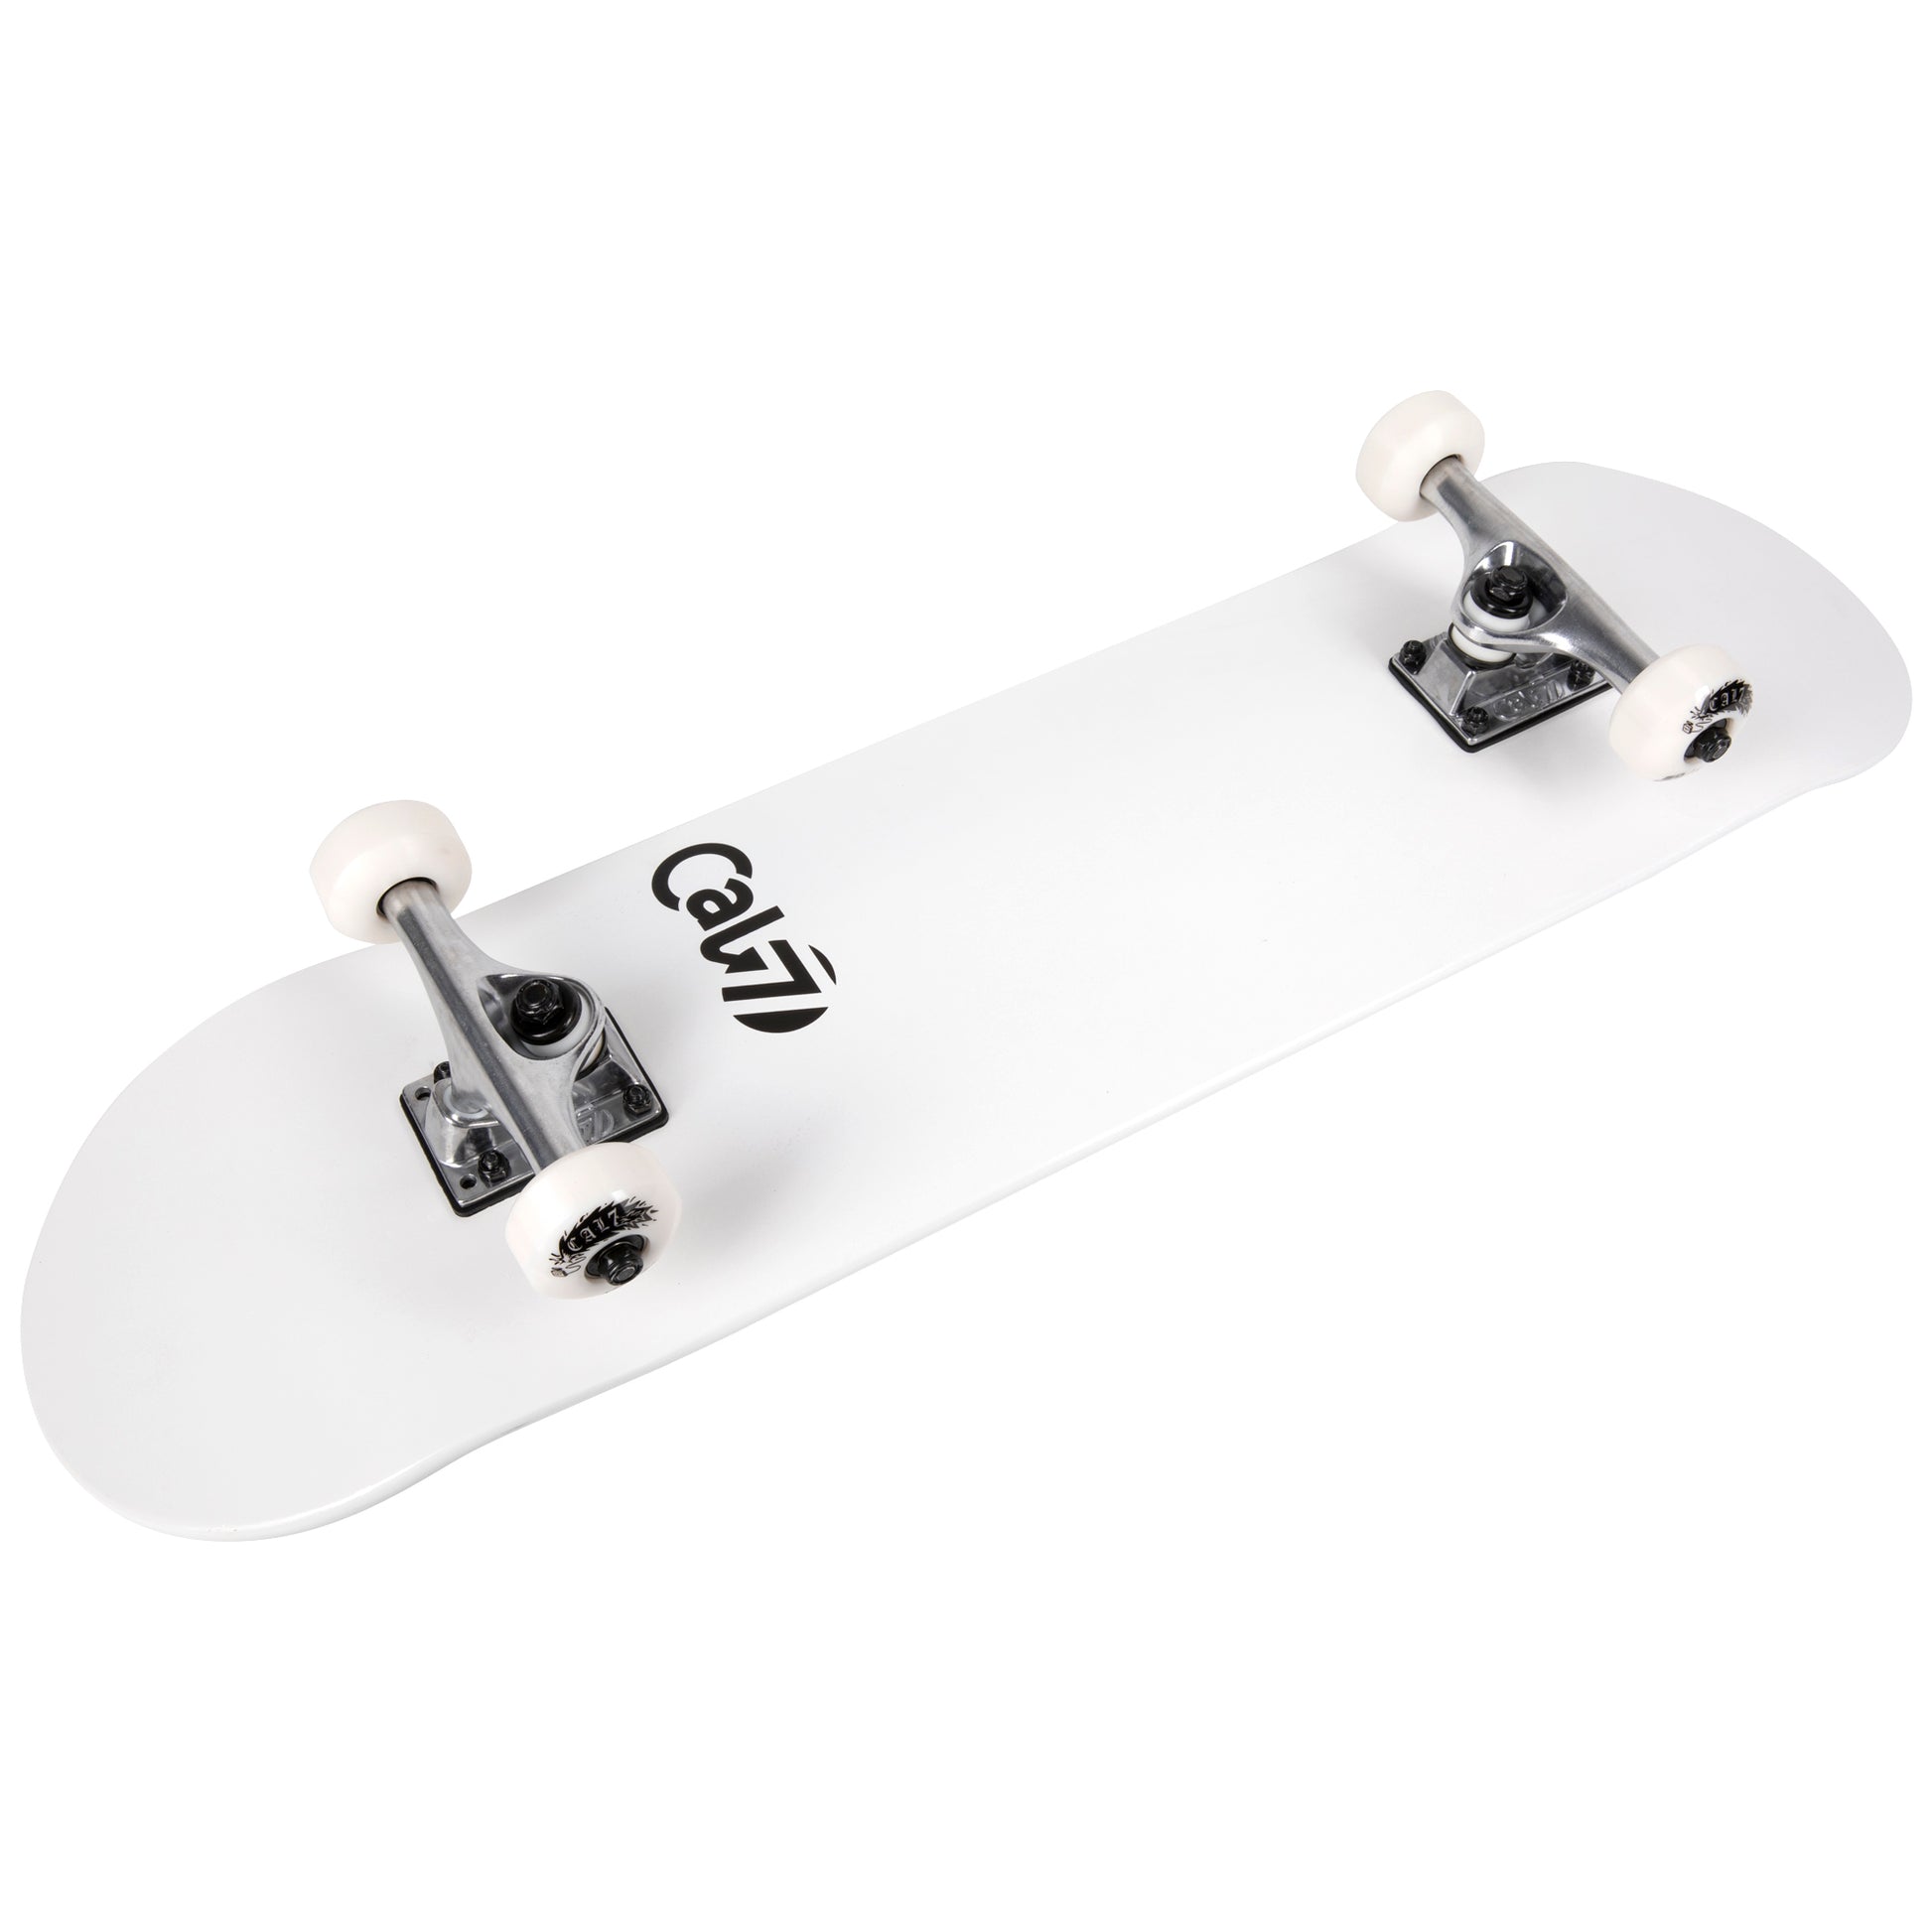 Cal 7 Complete 7.5/7.75/8-Inch Skateboard Yin with Logo, White Deck, Pink and Blue Accents 